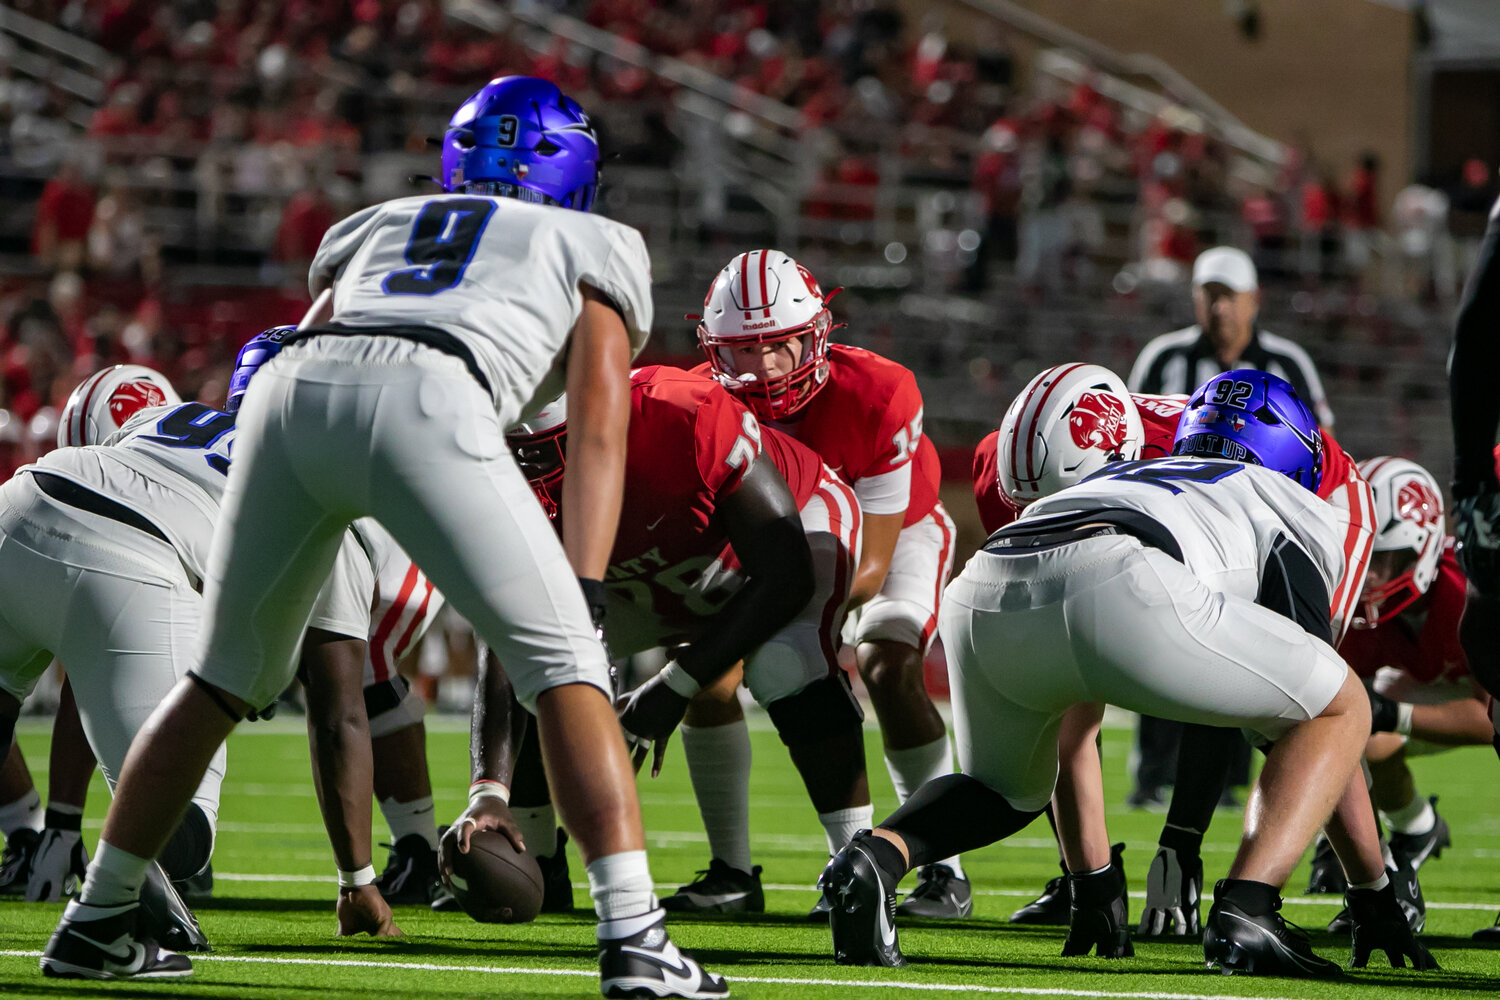 Gunner Nelson gets ready for the snap during Saturday's game between Katy and Clear Springs at Rhodes Stadium.